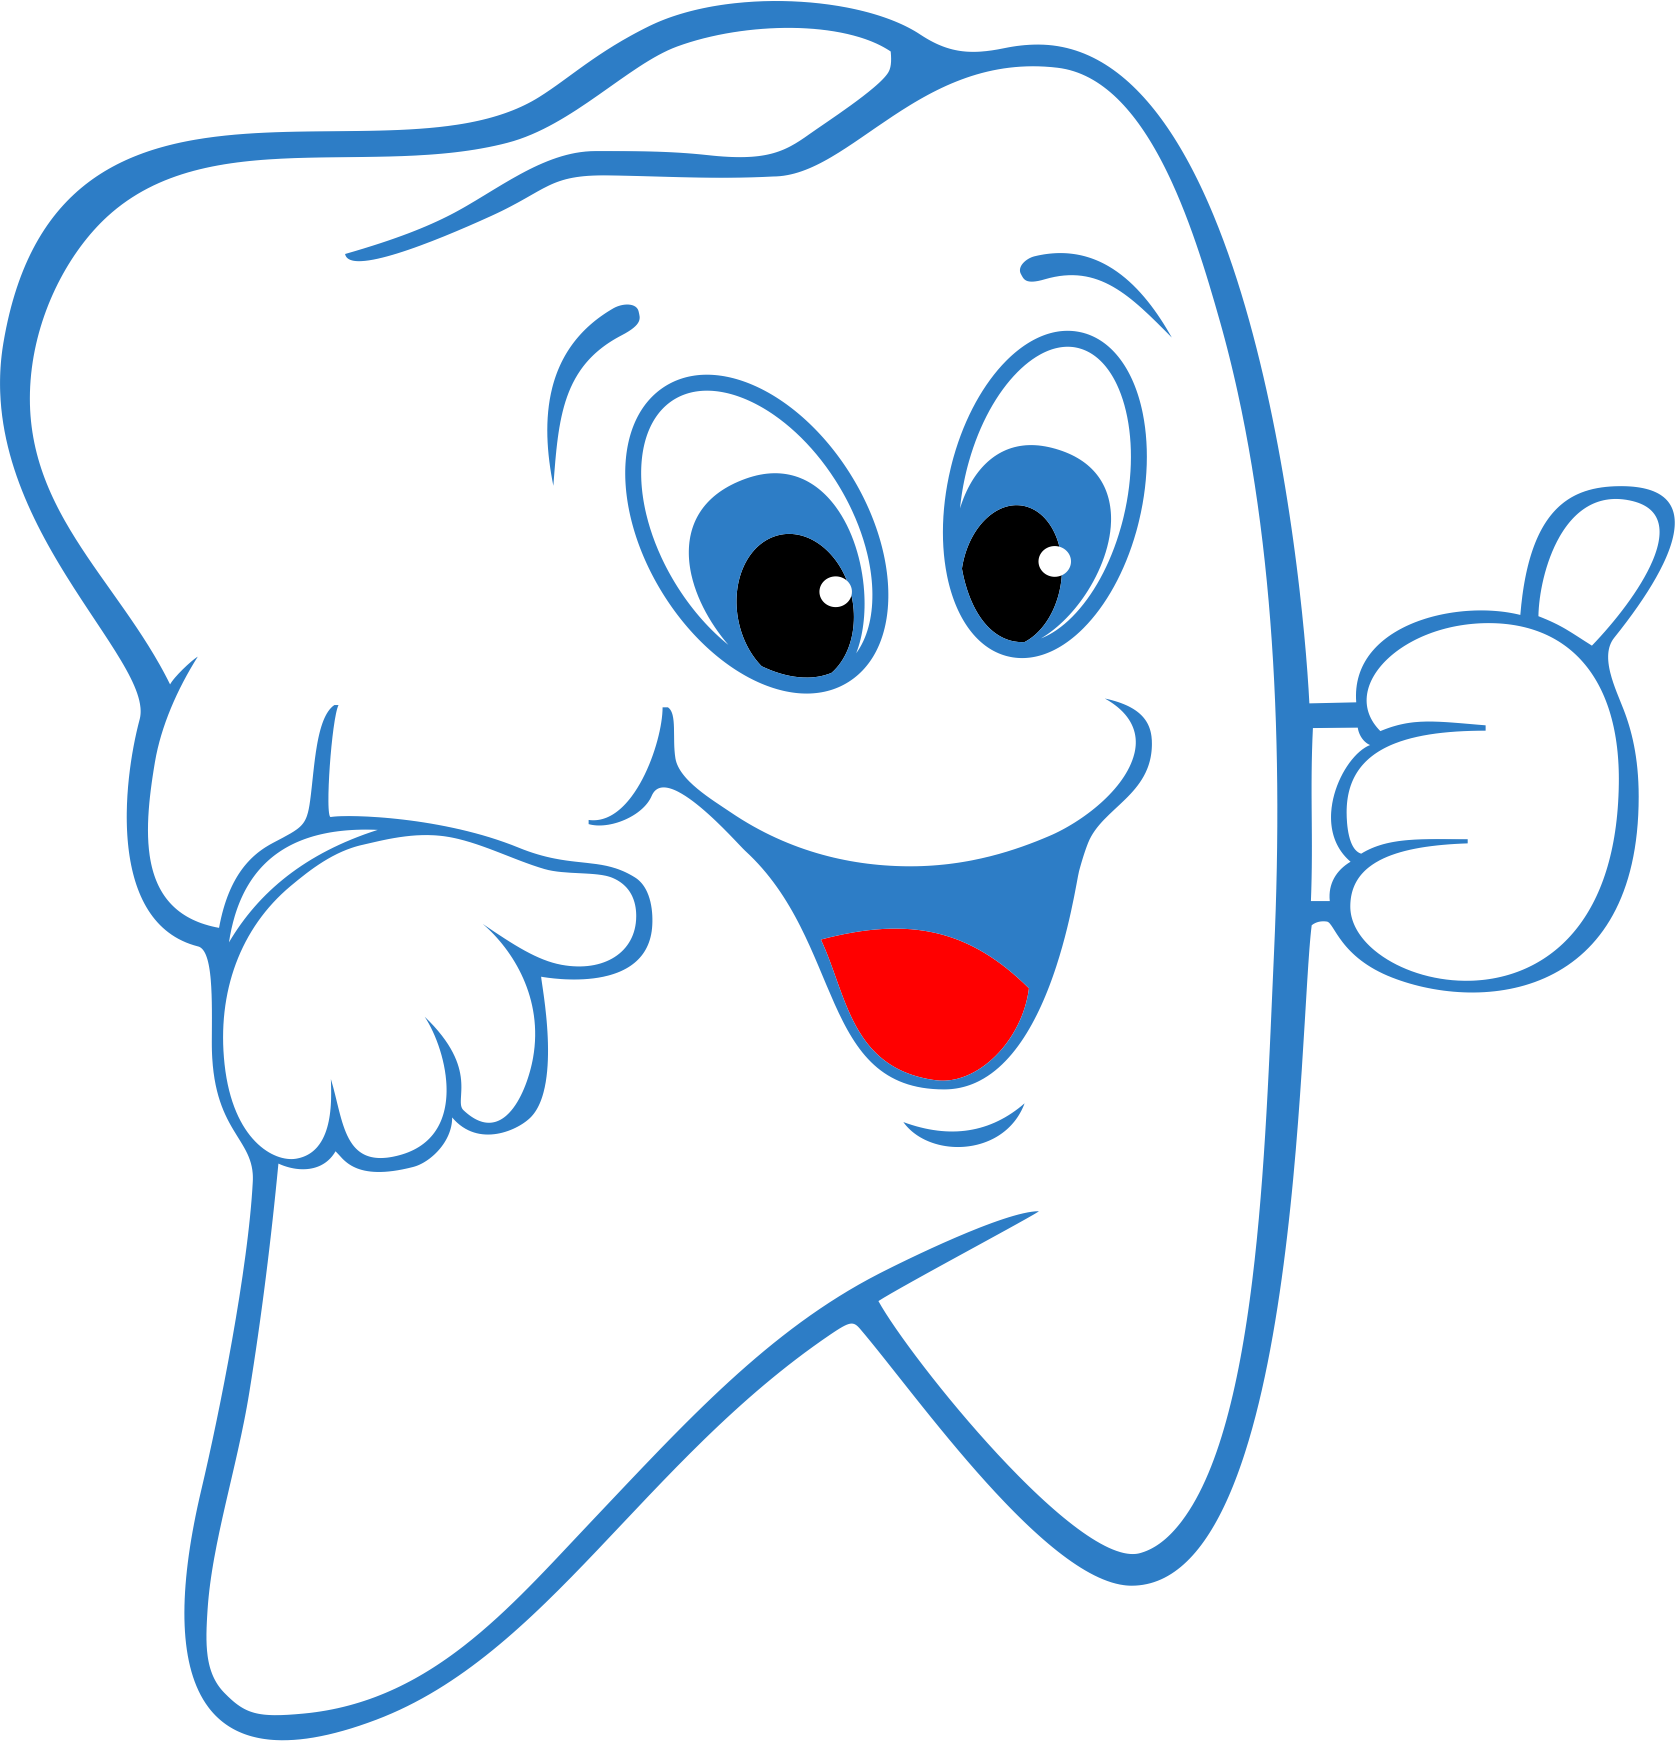  collection of high. Dental clipart dental health